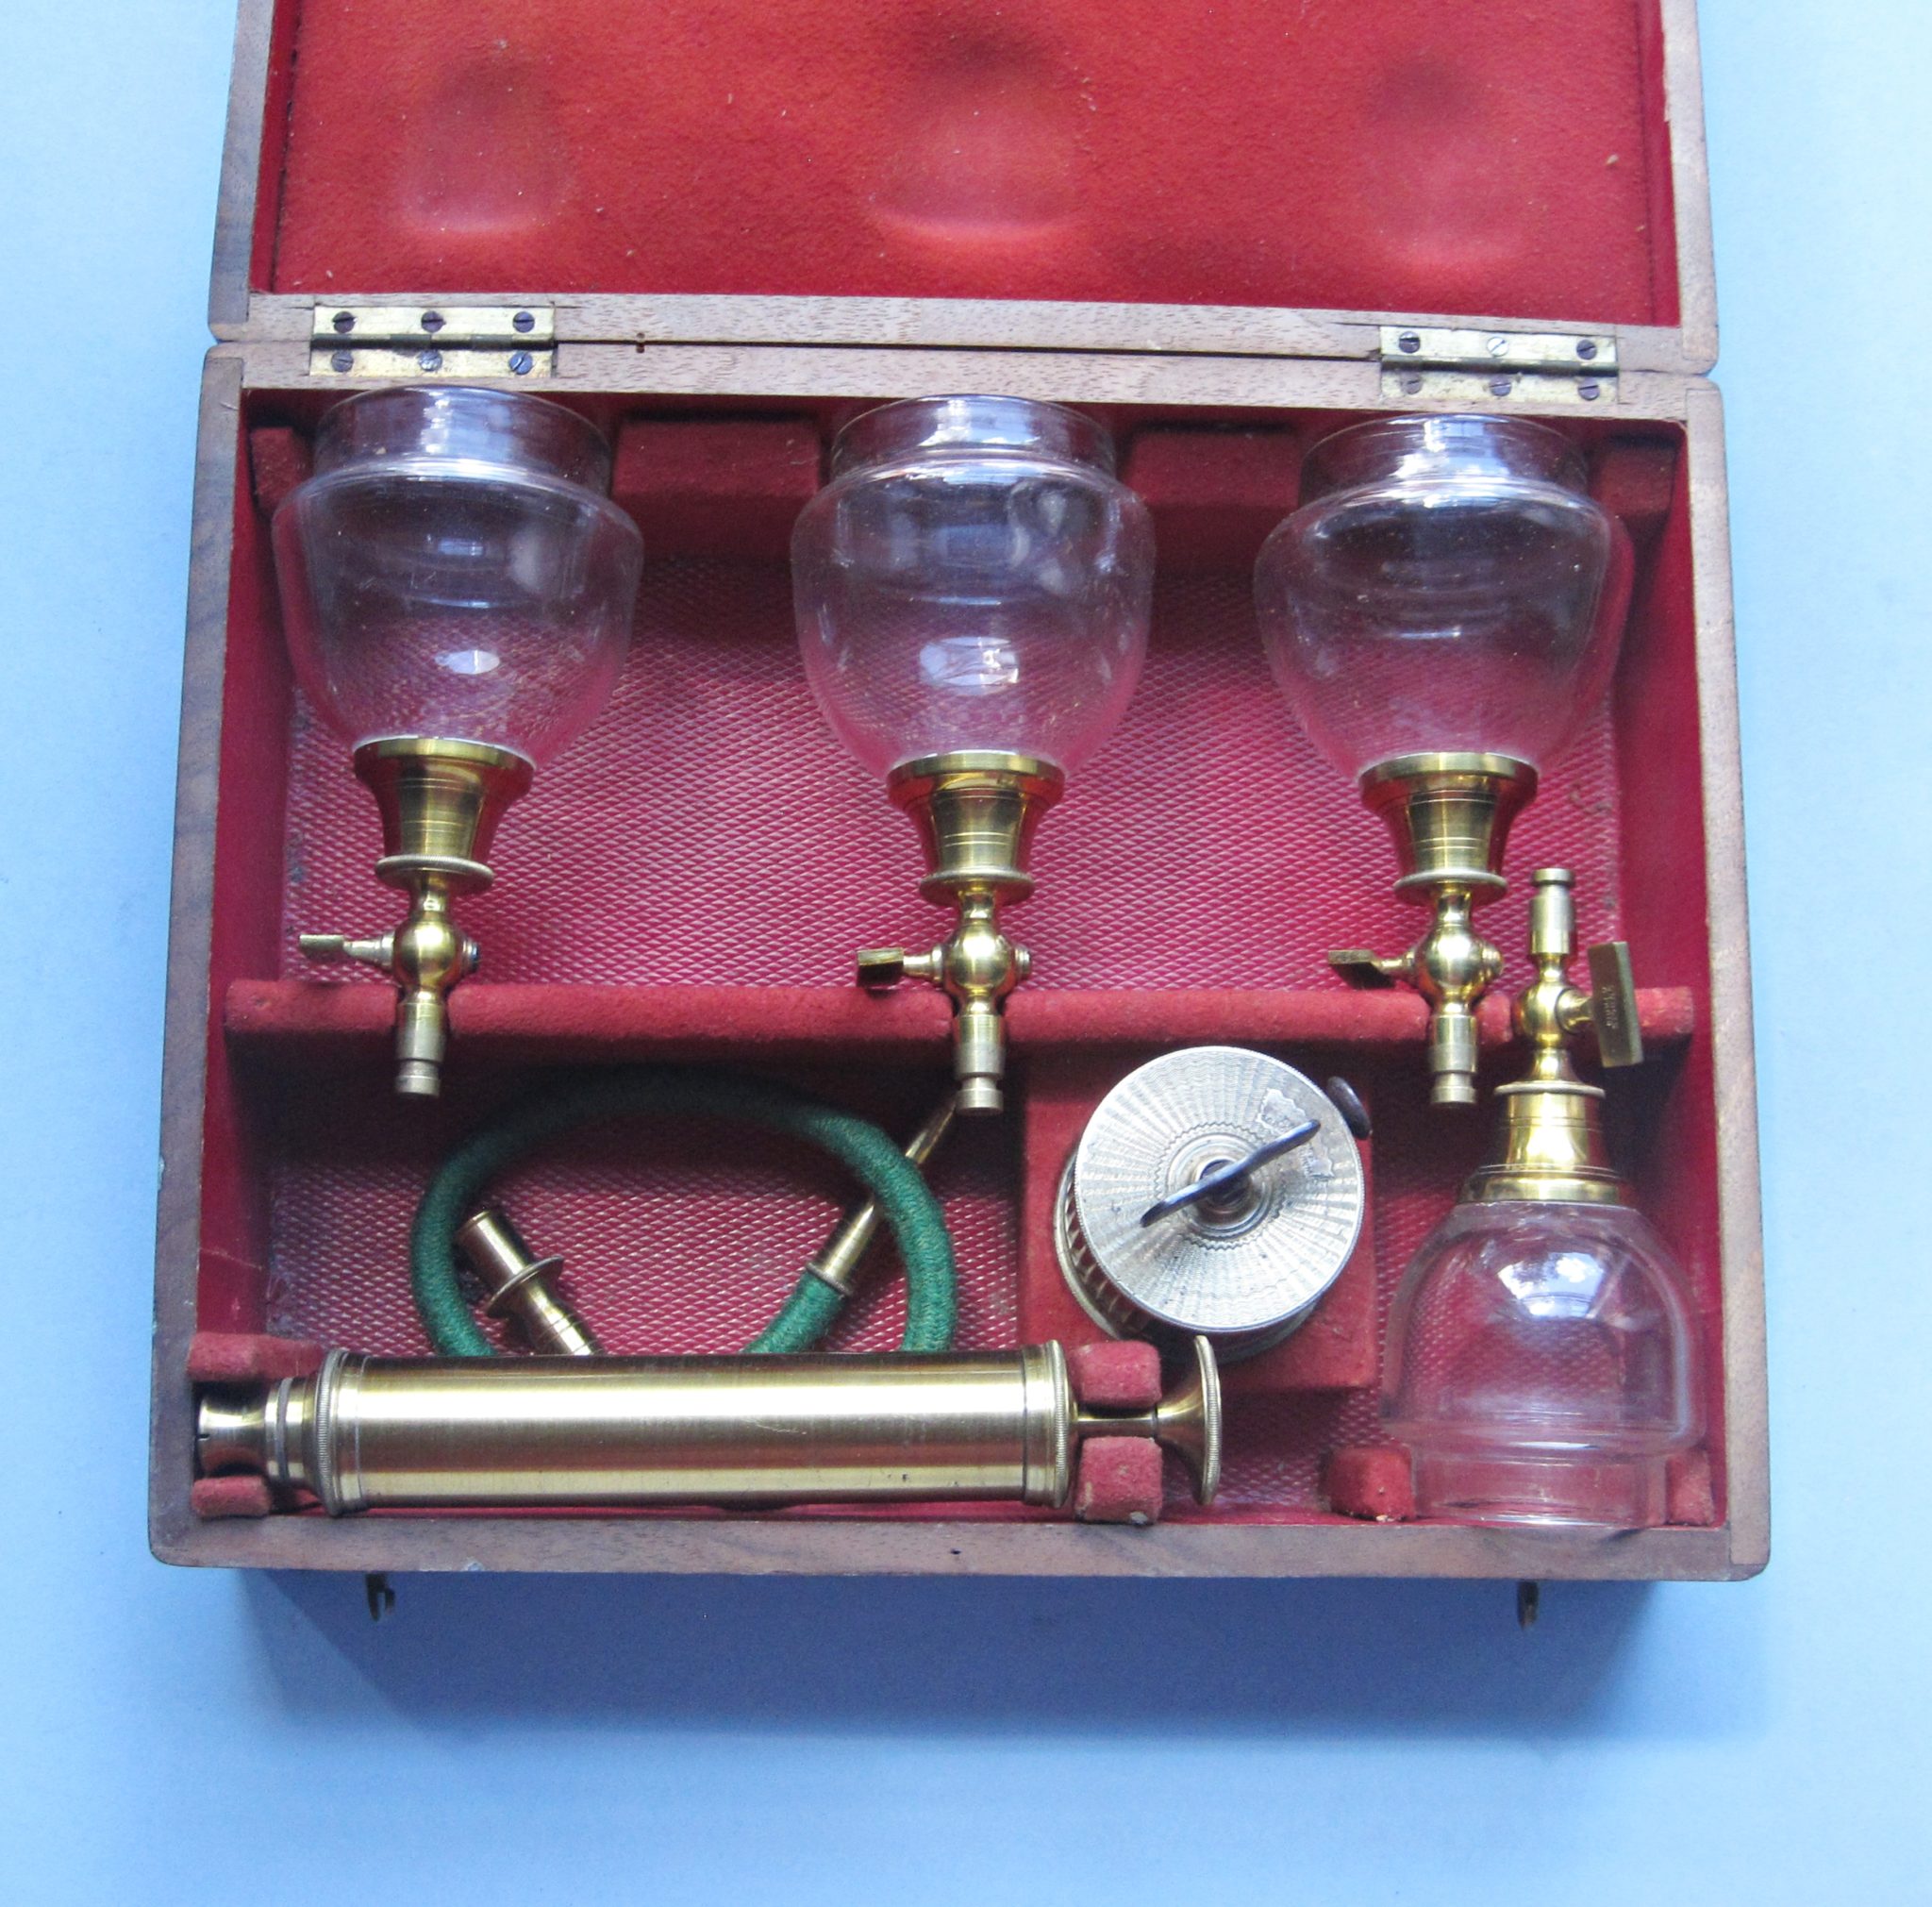 A Superb Mid-19th C. French Wet-Cupping Set by Dubois